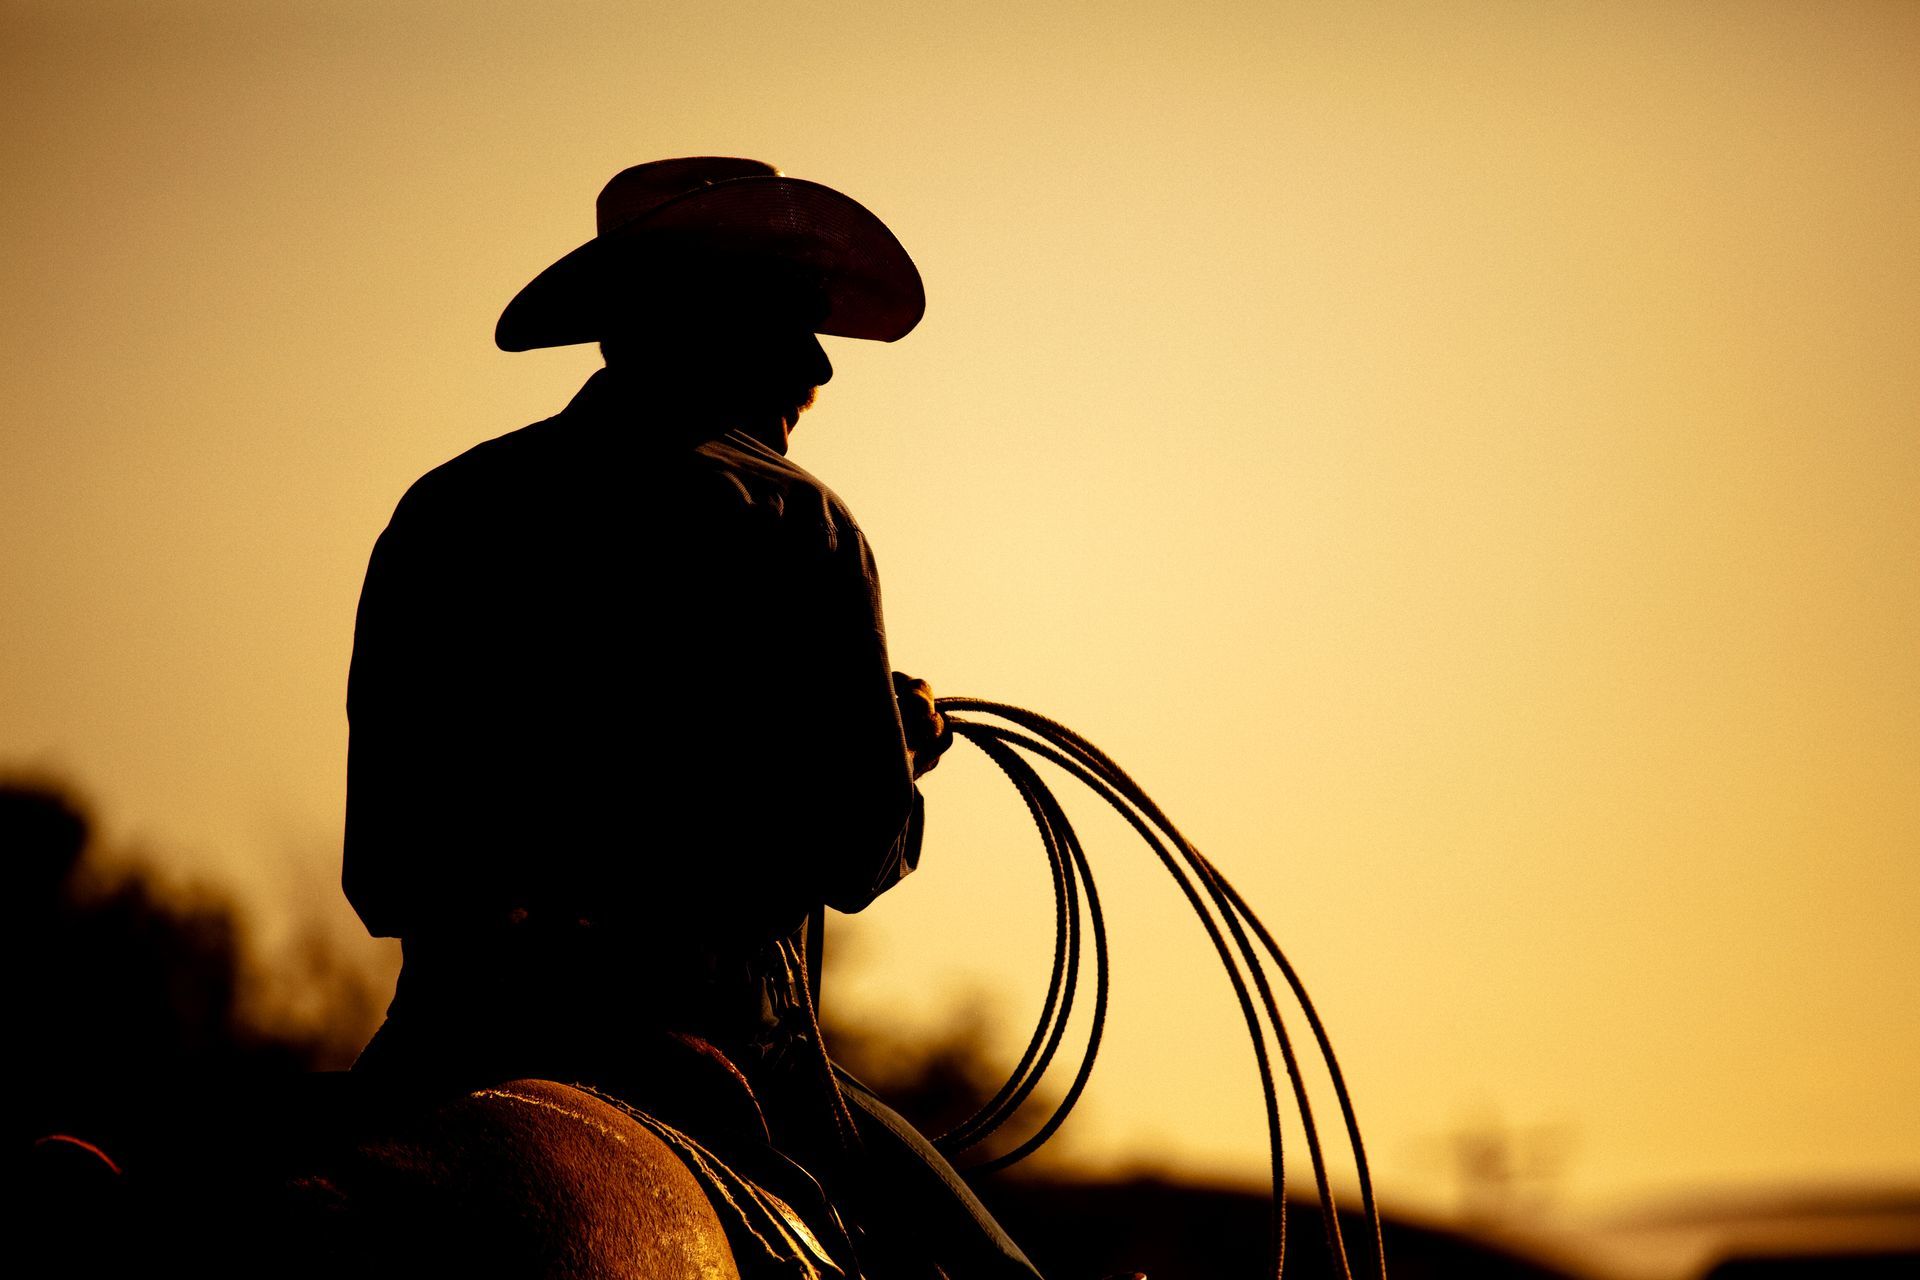 a silhouette of a cowboy on a horse holding a lasso